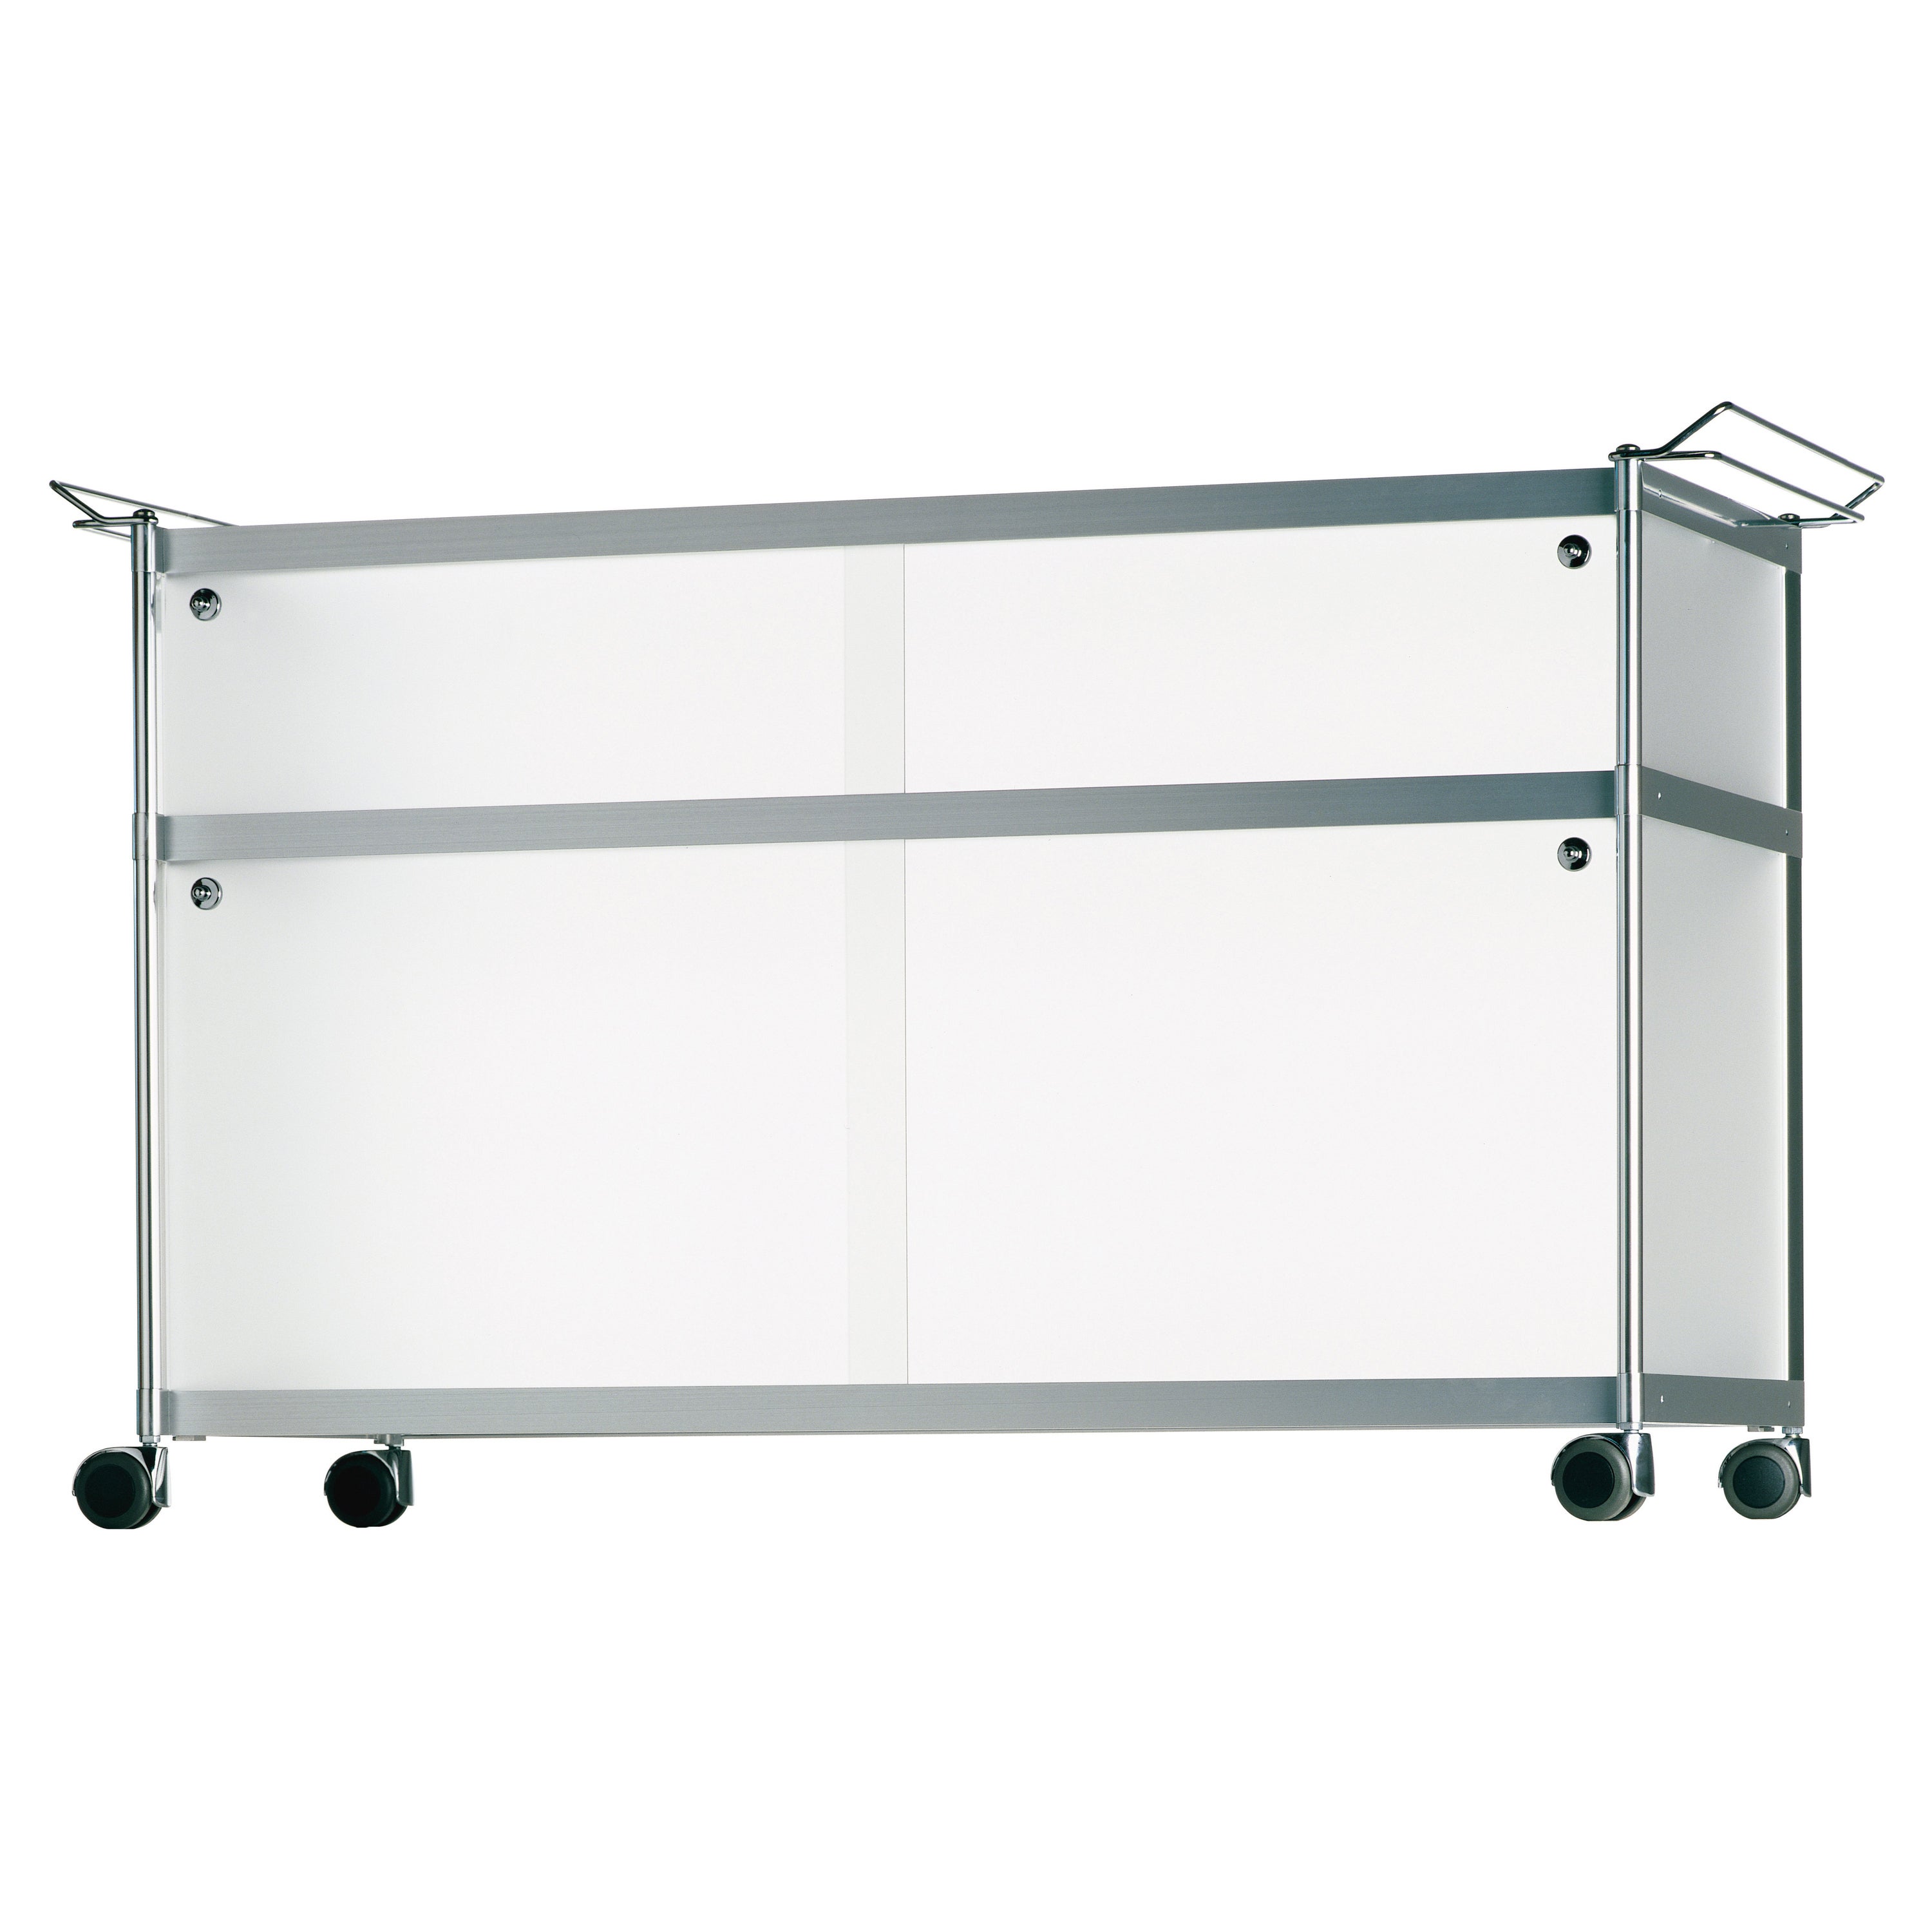 Alias SEC CAR018 Trolley with Aluminum Profiles and Glass Shelves For Sale